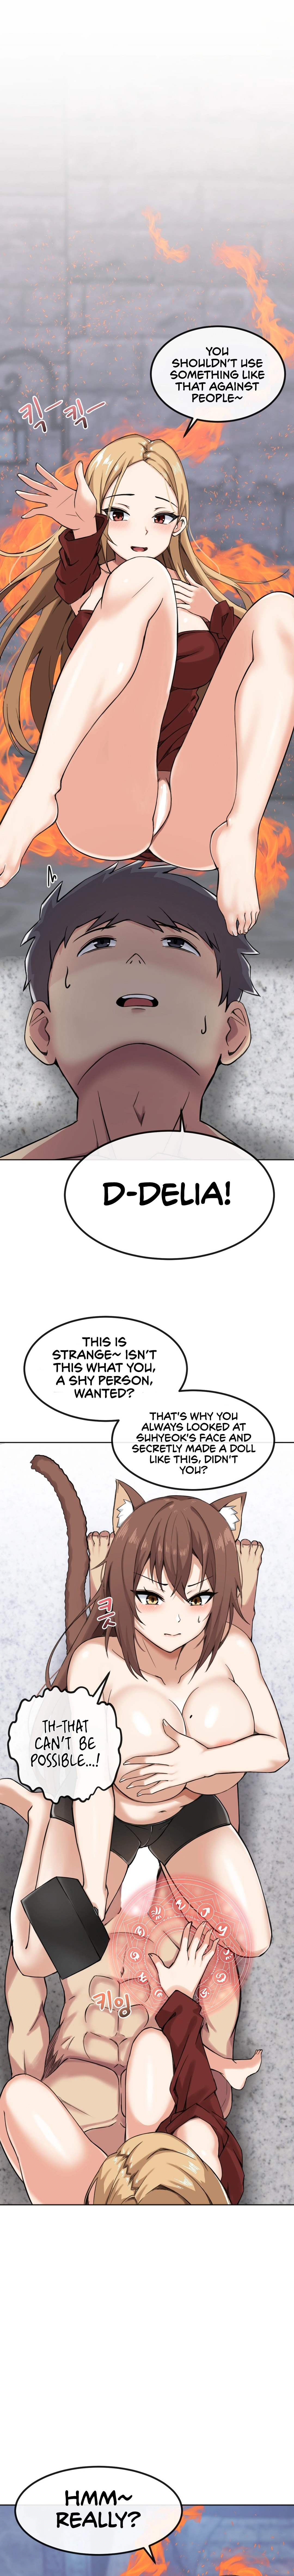 Meat Doll Workshop in Another World - Chapter 2 Page 11